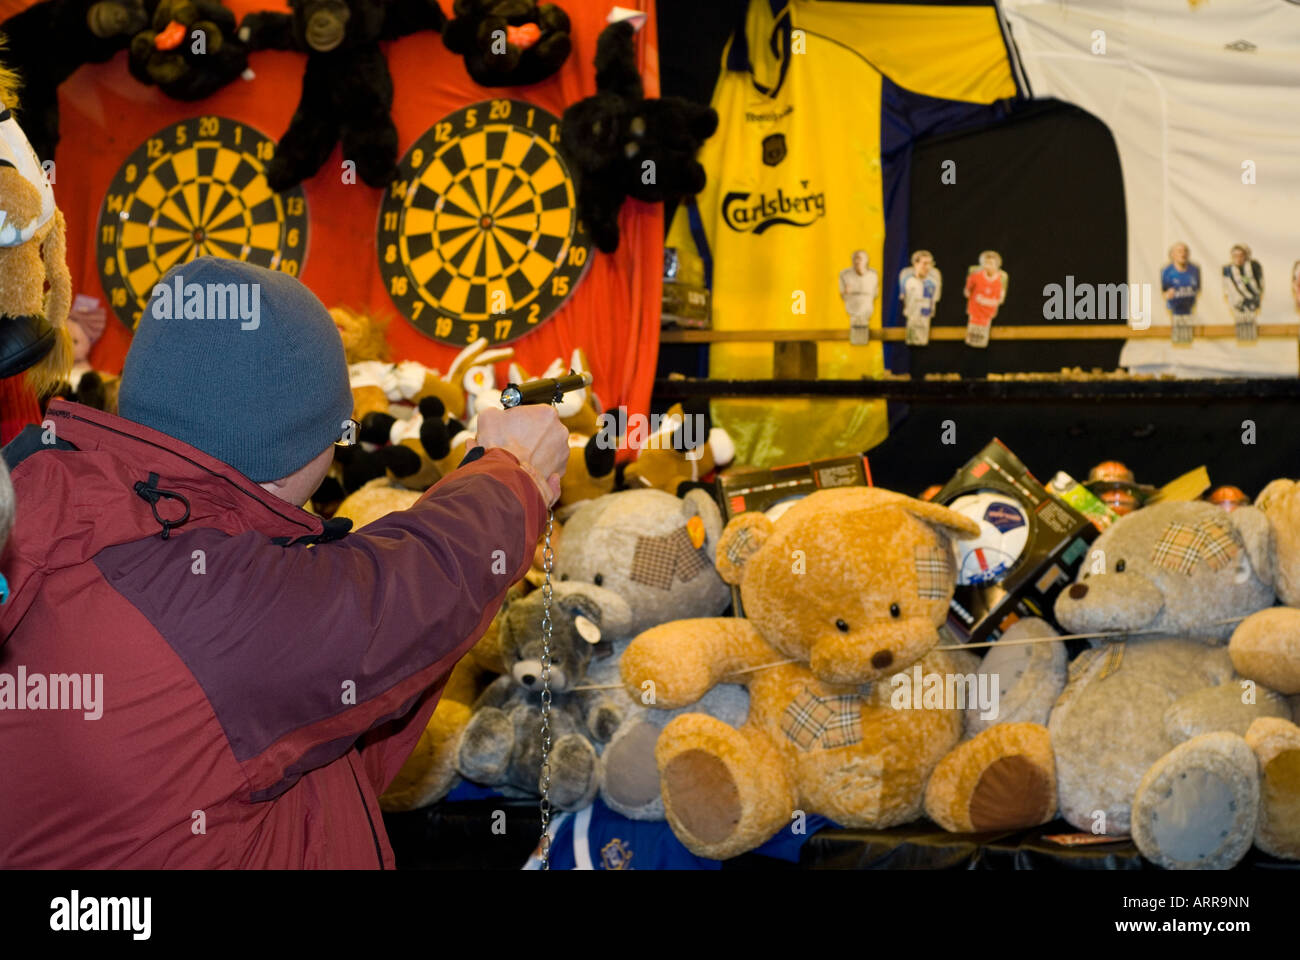 Man shooting with a toy gun in a funfair in Manchester UK Stock Photo